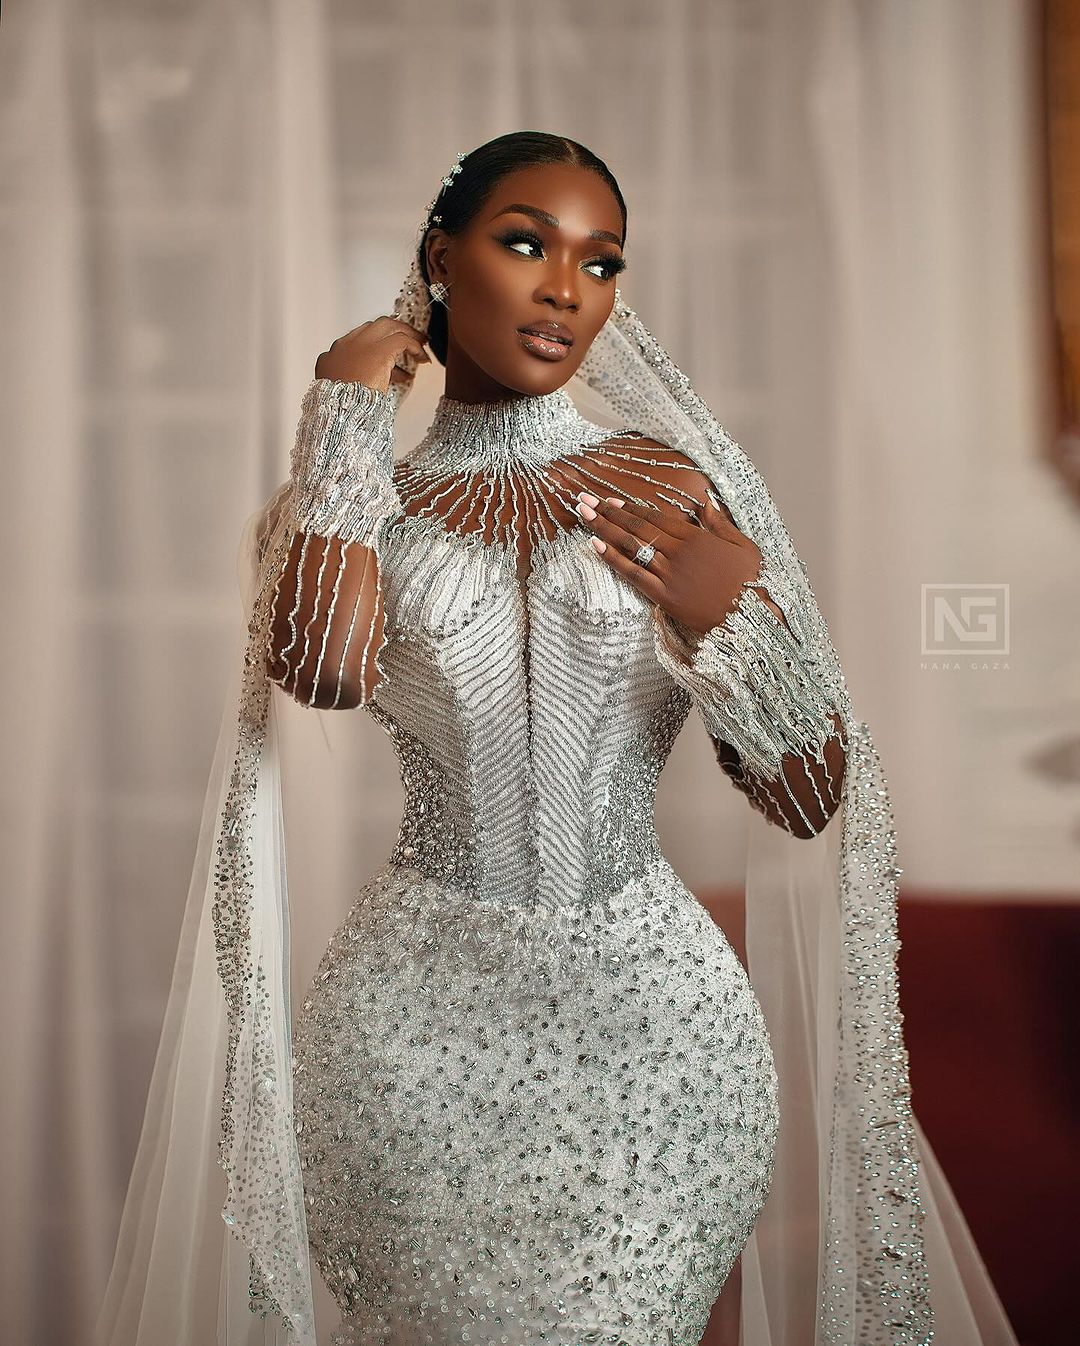 Seal Your White Wedding ceremony Glow With This Flawless Magnificence Look!